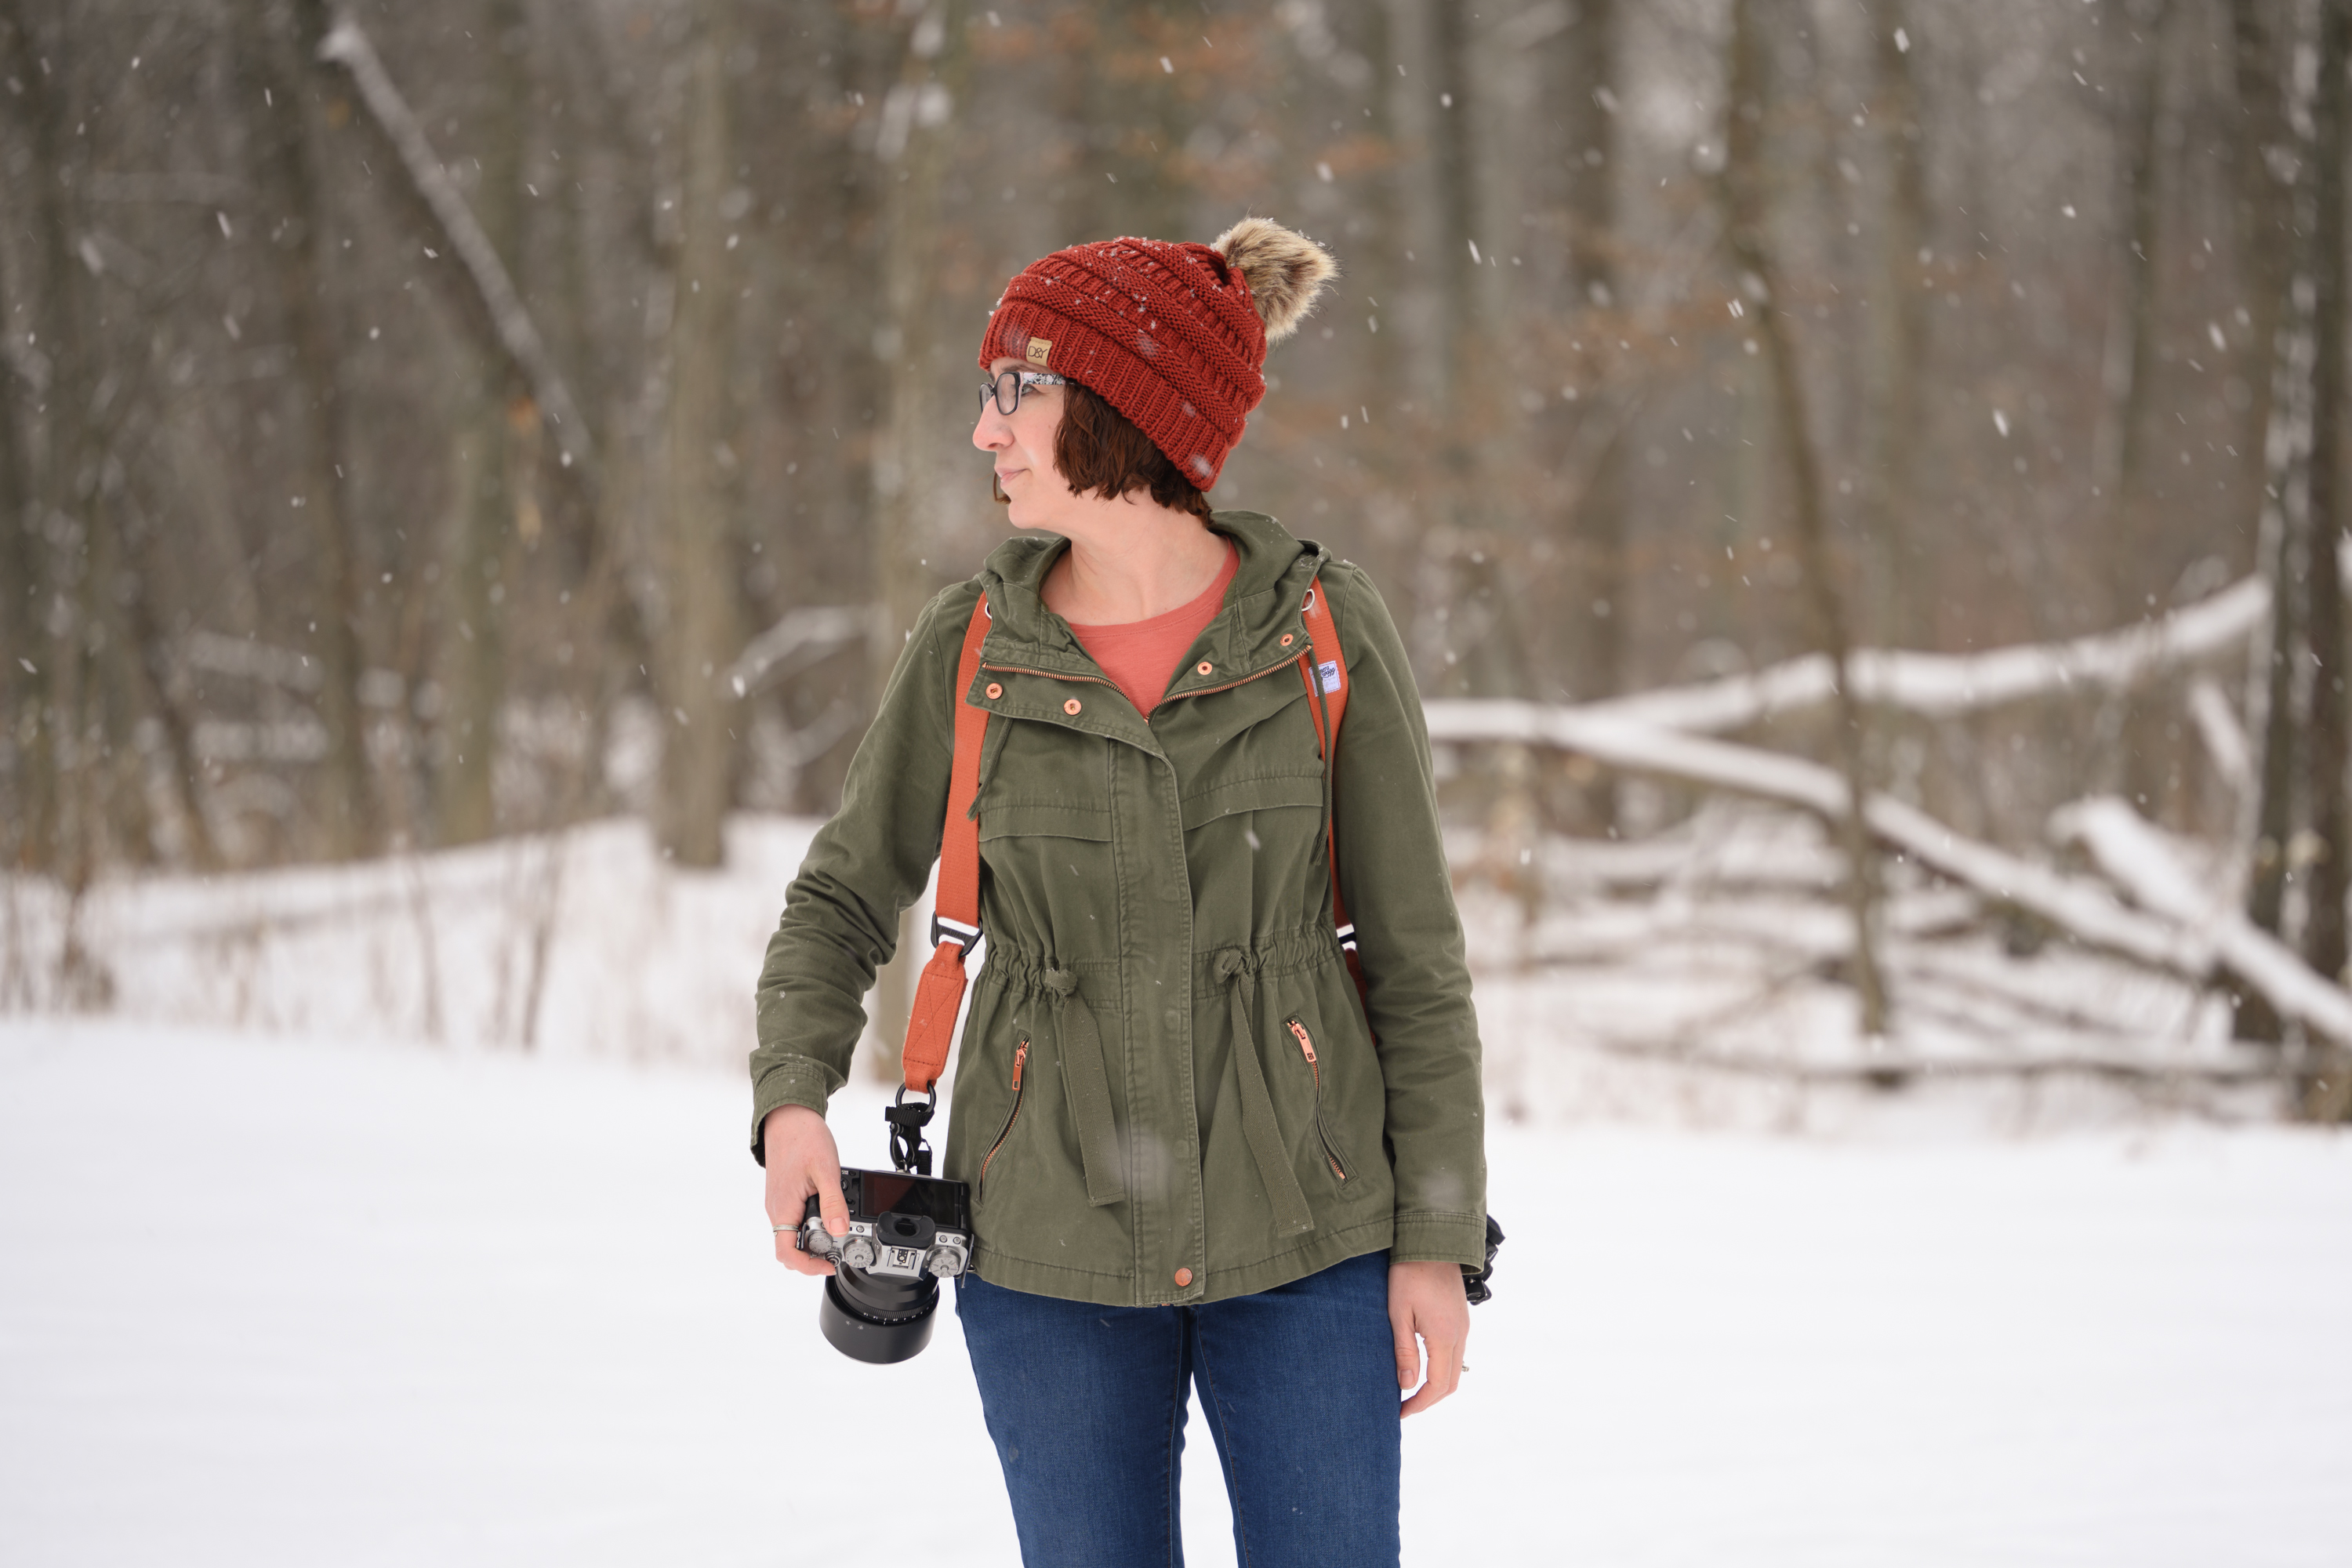 This Is Wonderful: Holdfast Swagg Dual Camera Strap Review